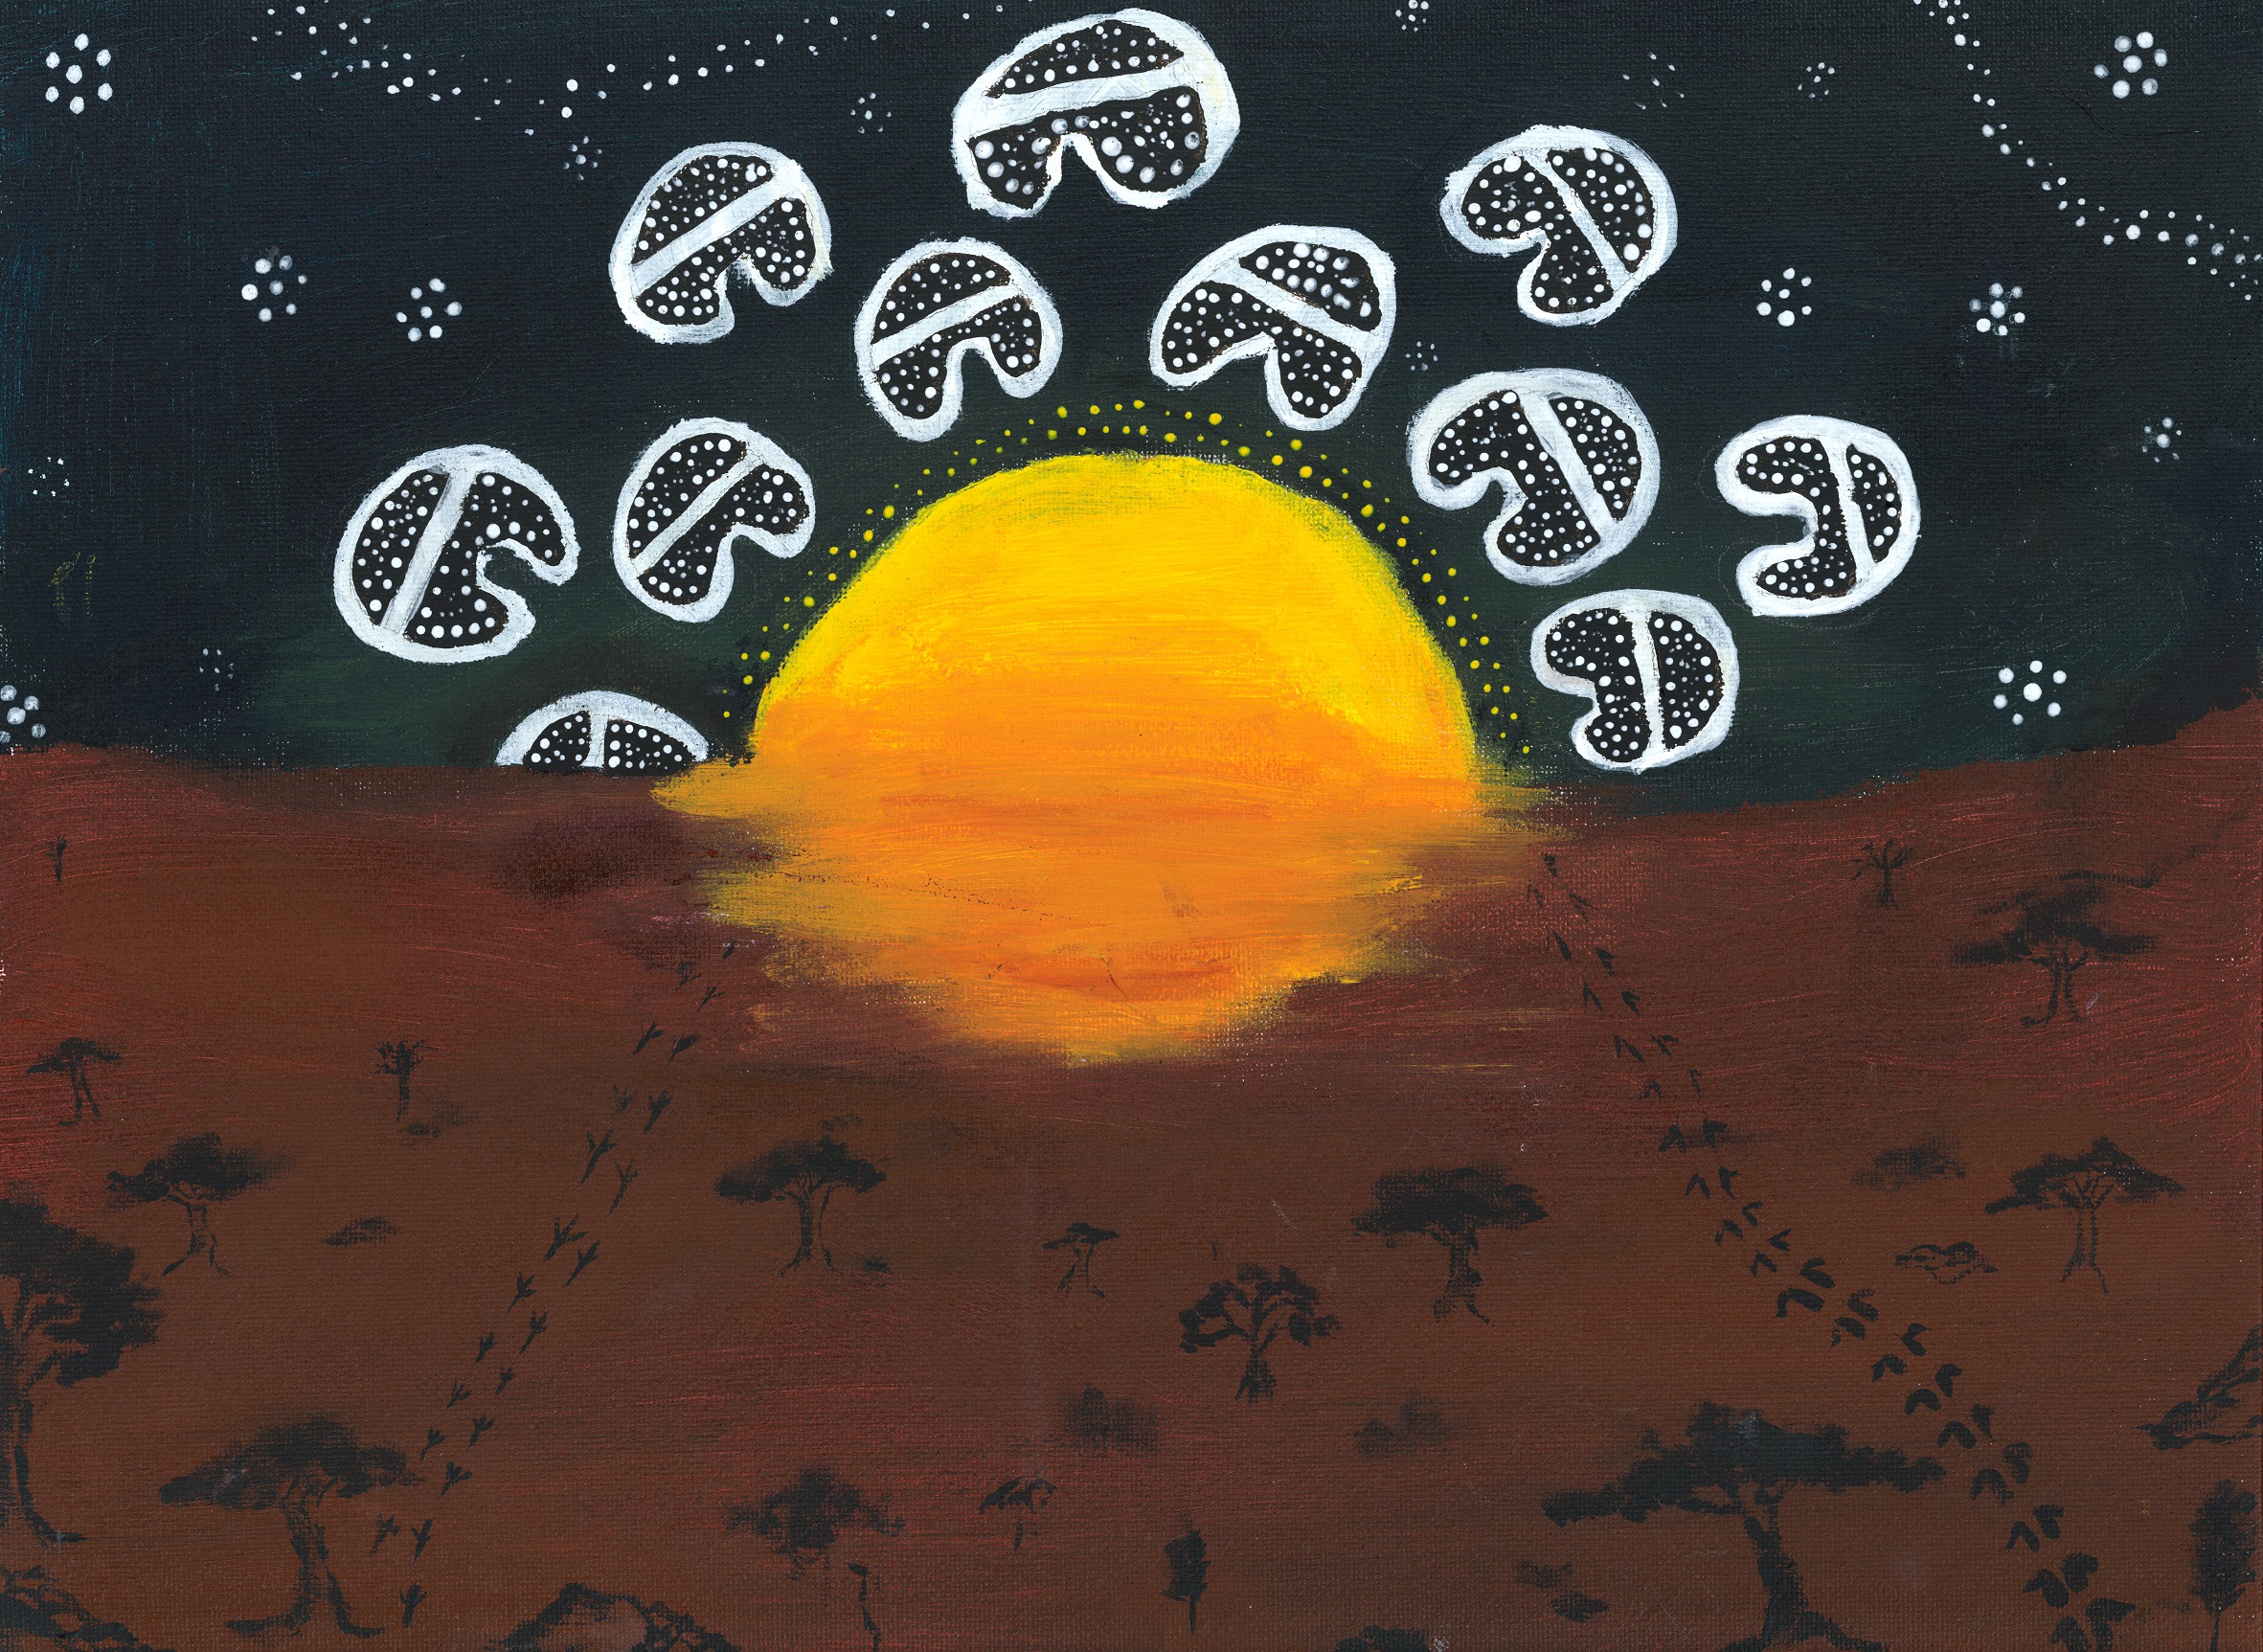 Aboriginal artwork depicting black sky with white star trails, the sun and brown earth with emu and kangaroos tracks